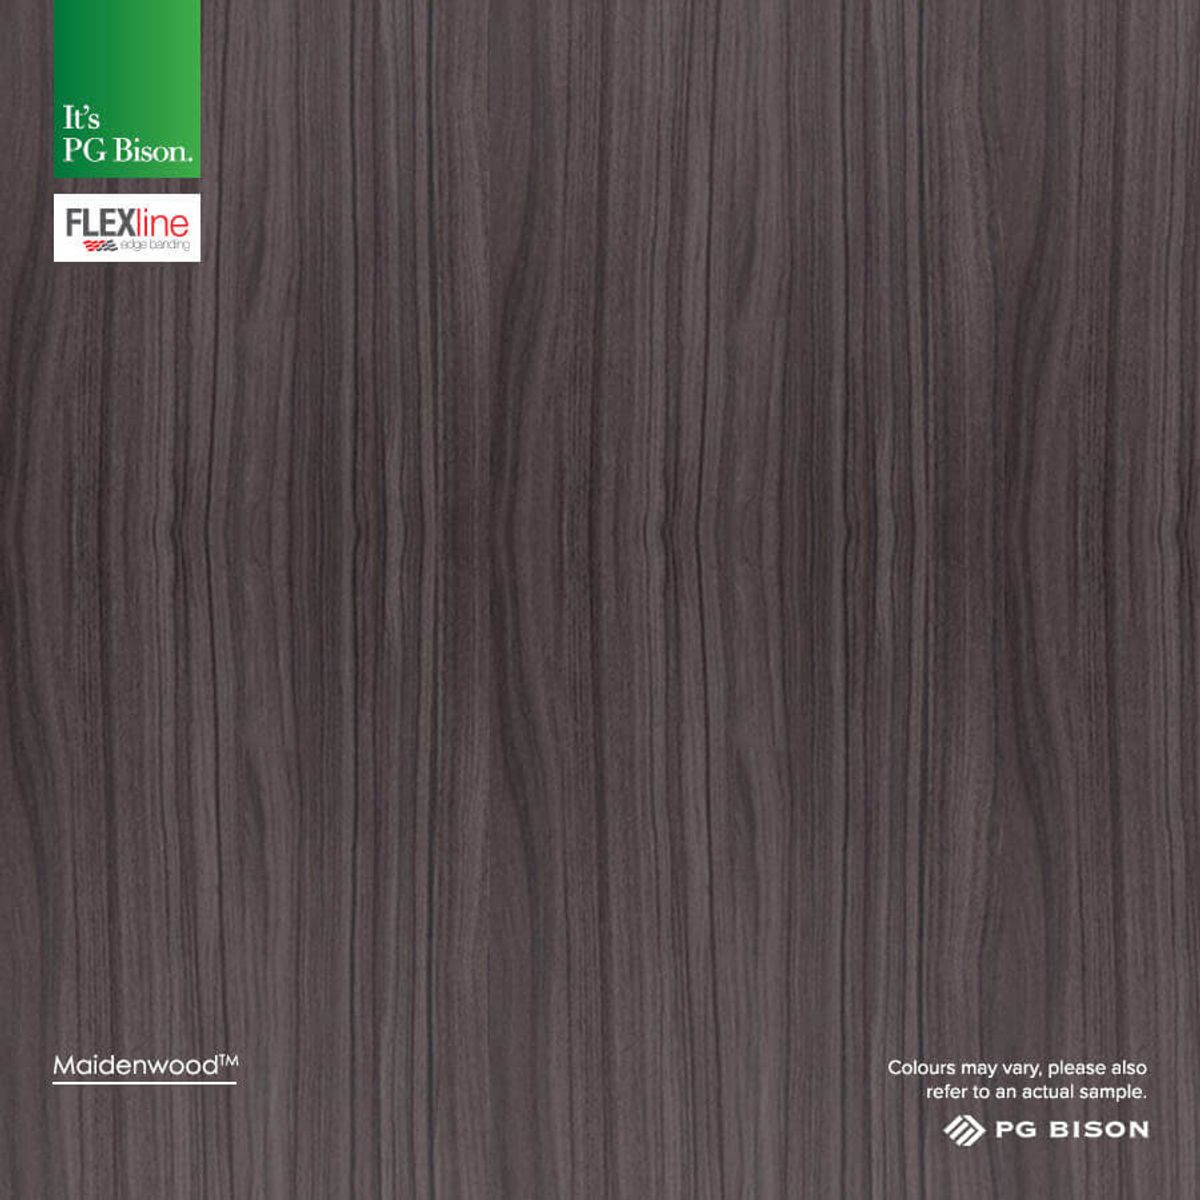 Edging Woodgrain(Thickness:0.8 x 22mm,Product Type:PER METRE,Colour:Maidenwood)